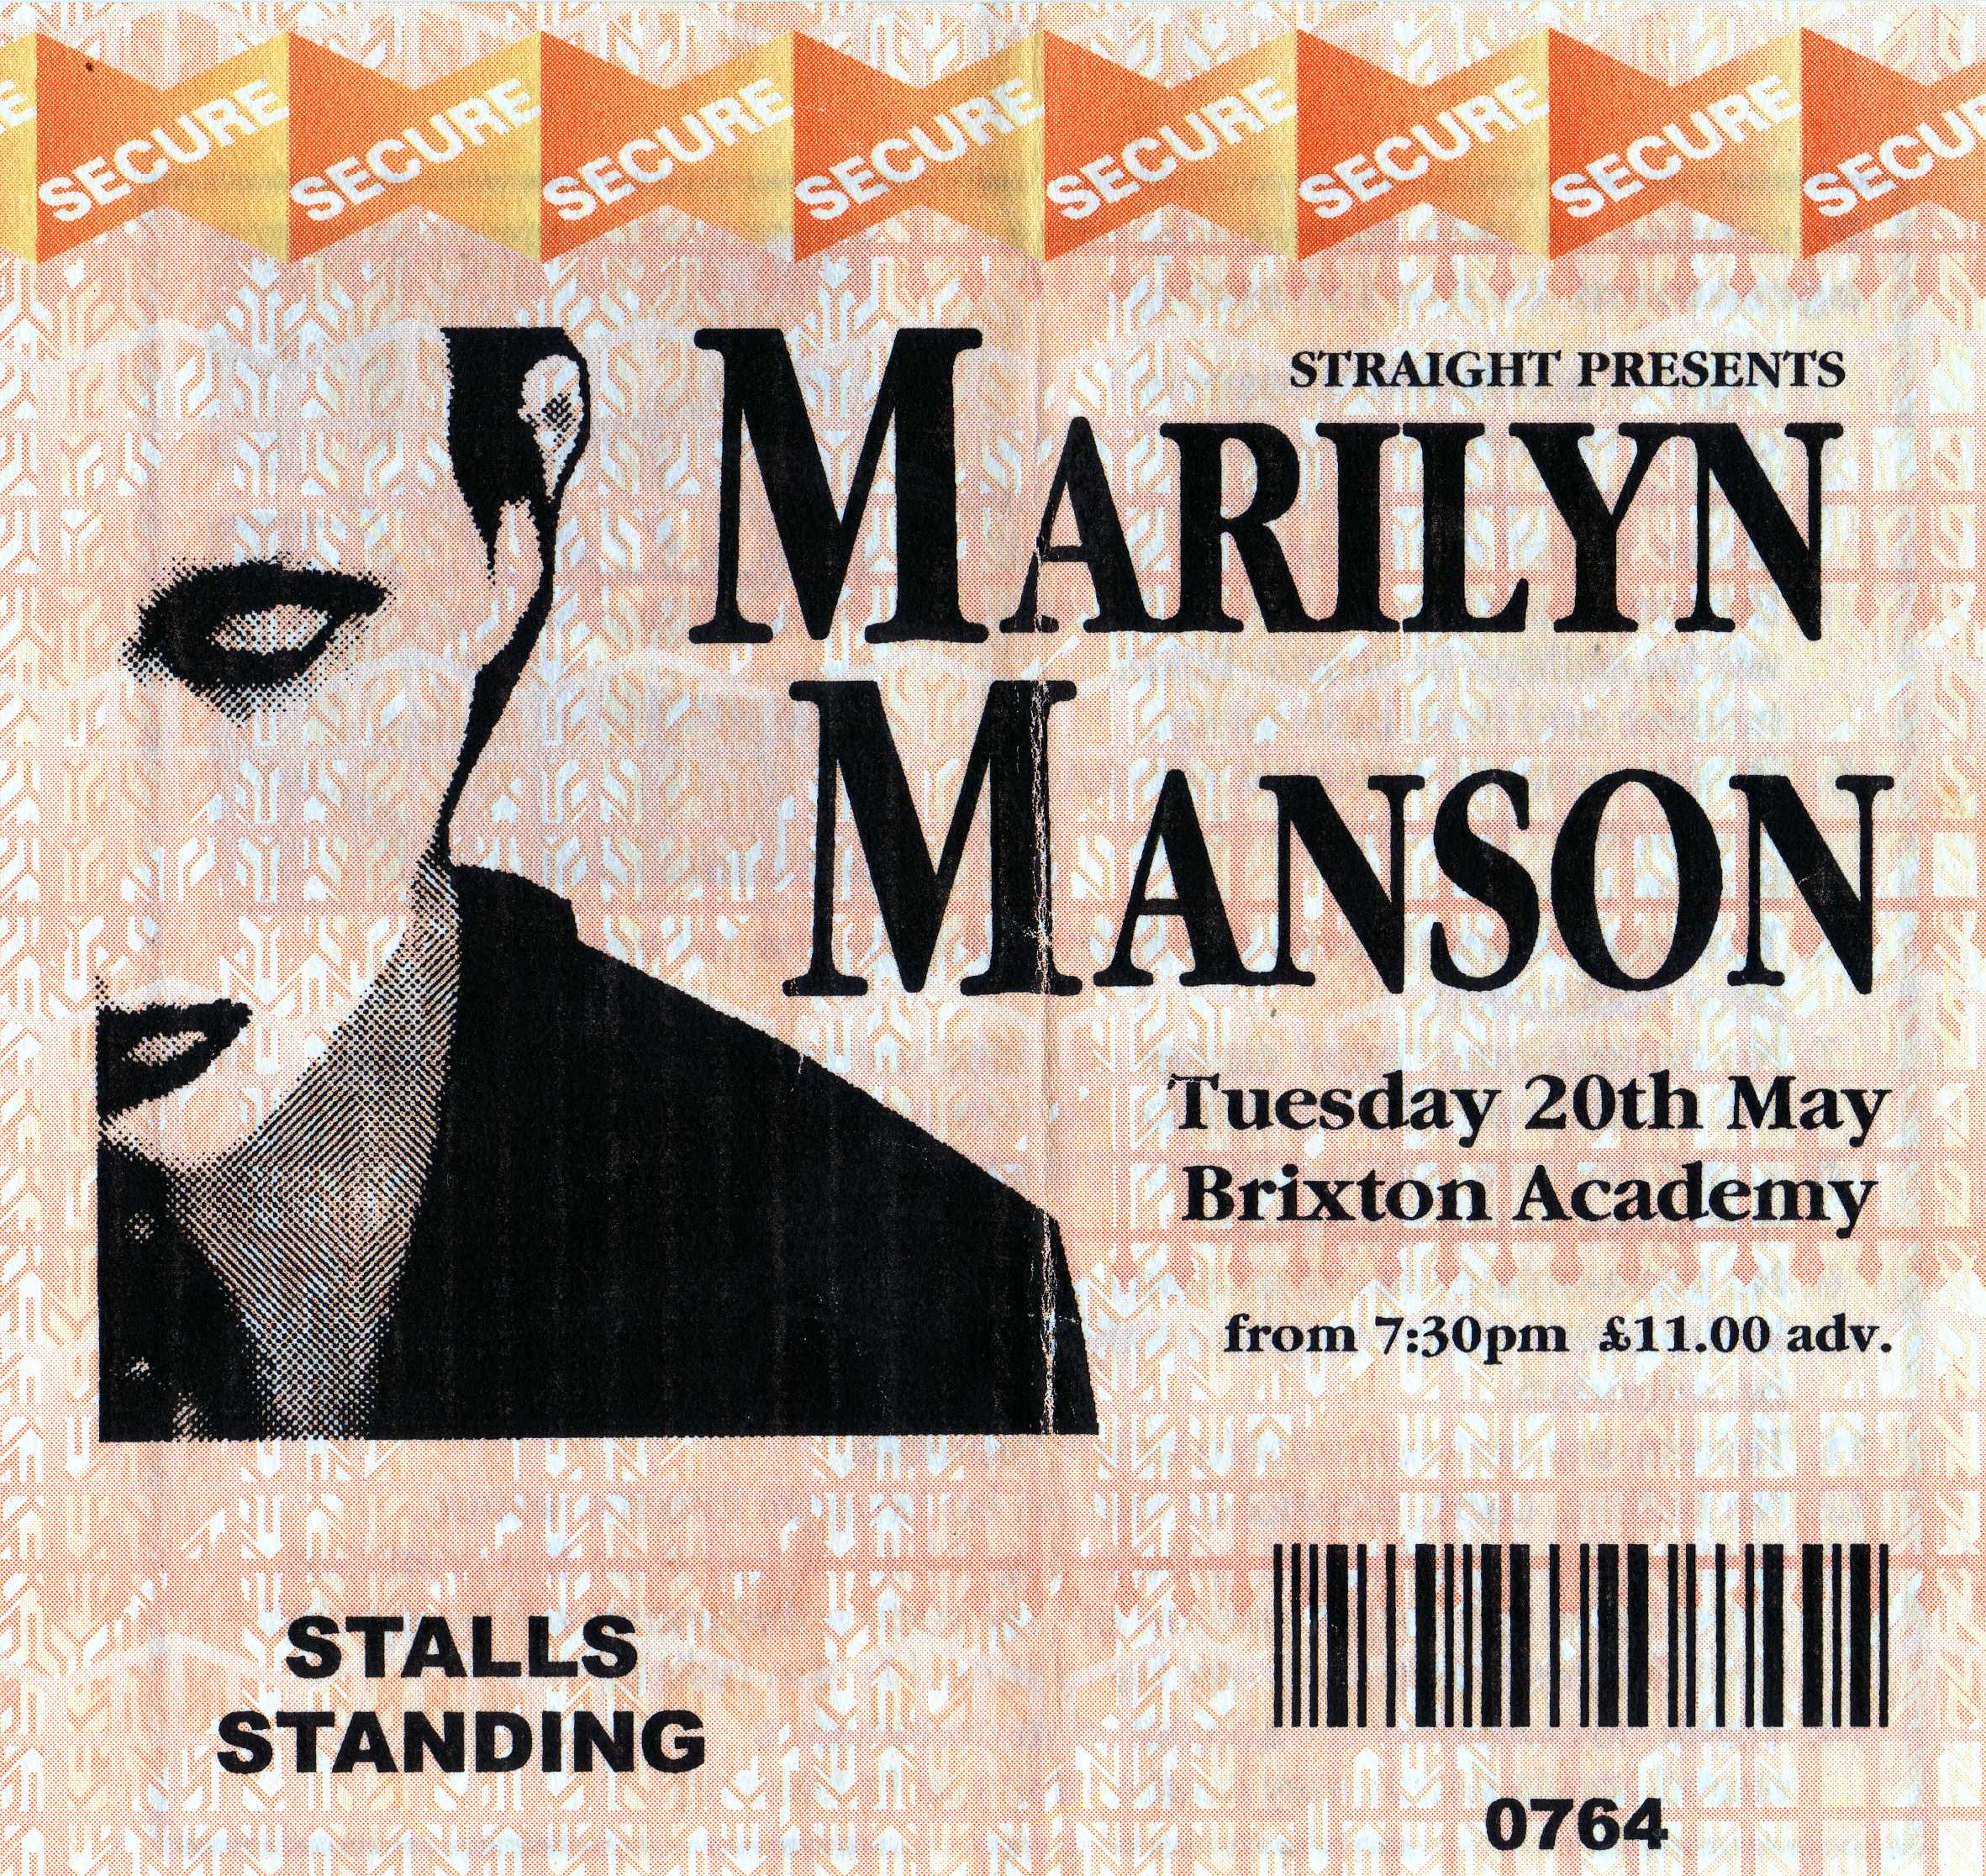 May 20, 1997 performance at Brixton Academy in London, United Kingdom.